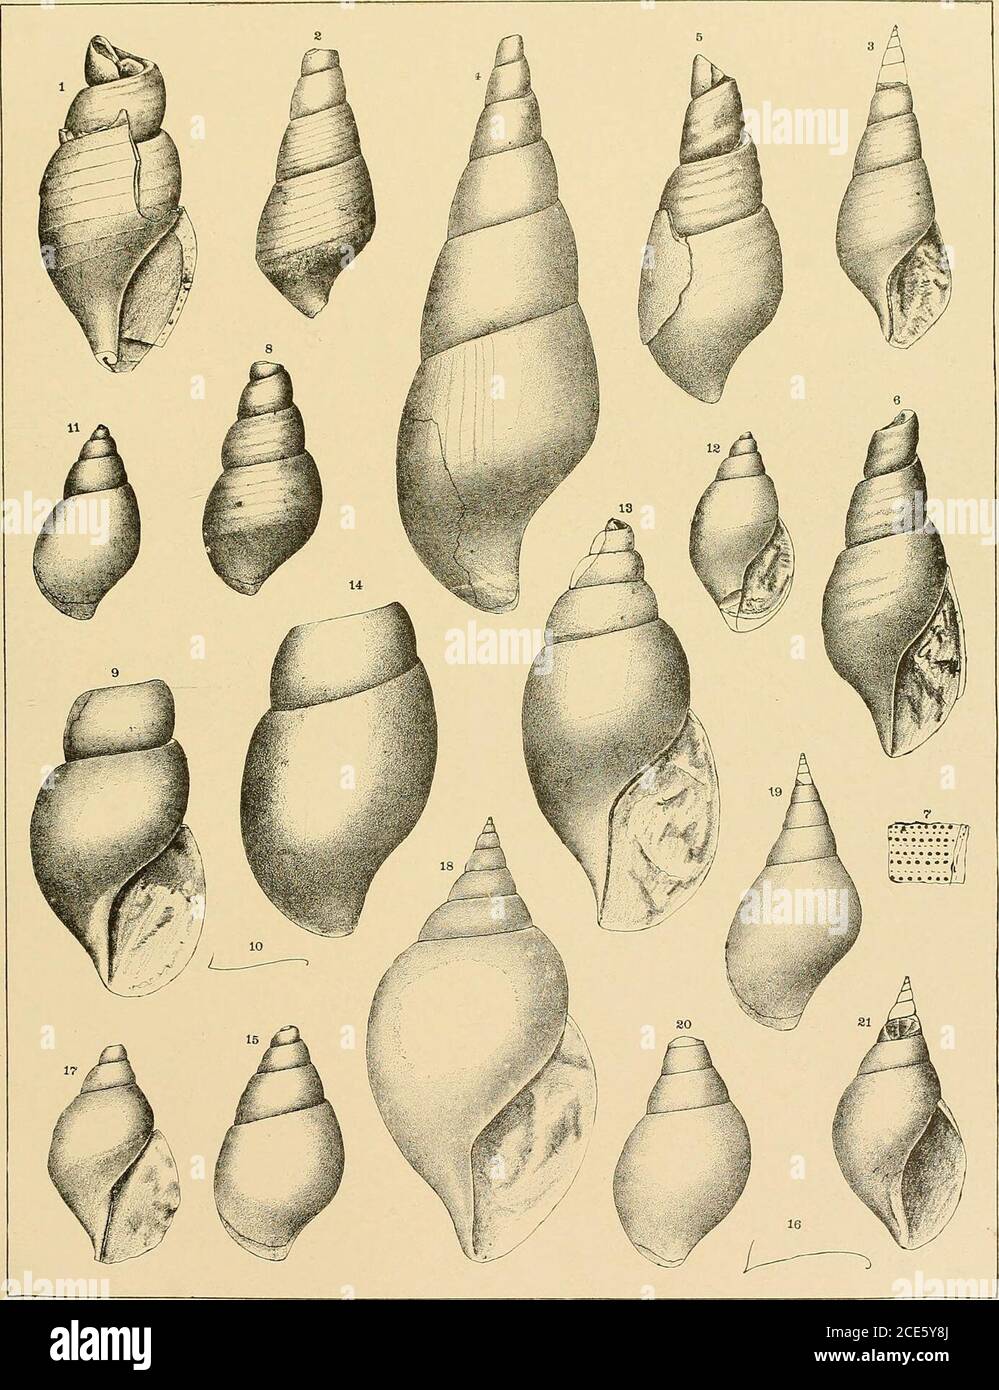 . The Geology of Minnesota . of the lip of the specimen represented by figs. 13 and 14. Figs 17 and 18 Fu.sispira inflata Meek and Worthen 1075 17 Apertural view of a cast of the interior of a young specimen. Lower part of Fusispira bed, Kenyon, Minnesota. 18 Apertural view of a large and nearly perfect cast of the interior, showing the adult appearance of the species. Fusispira bed, Goodhue county, (HaderP. O.), Minnesota. In the variety which occurs in the Maclurea bed theunder side of the whorls is more ventricose, causing the bend in the inneroutline of the aperture to be more abrupt. Figs Stock Photo